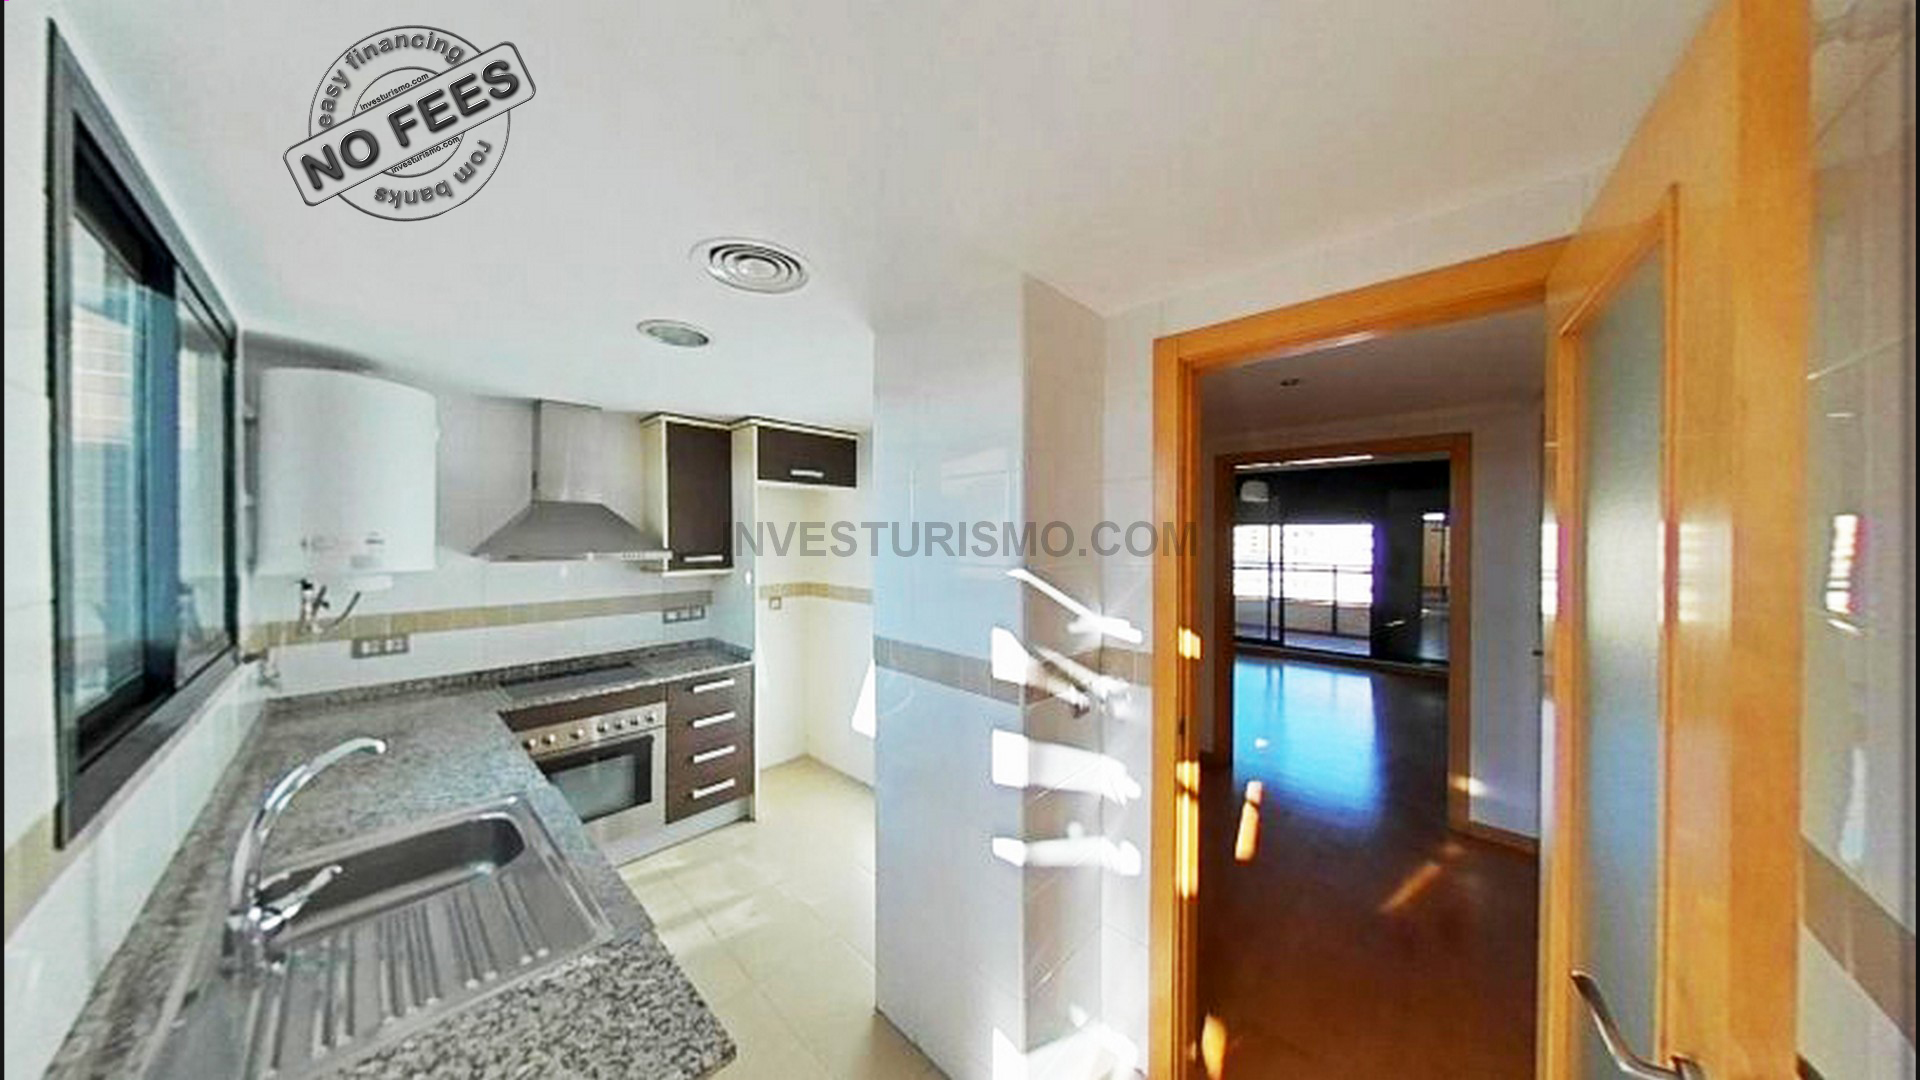 Apartment 2 bedrooms 2 bathrooms, terrace and balcony in Alicante Center